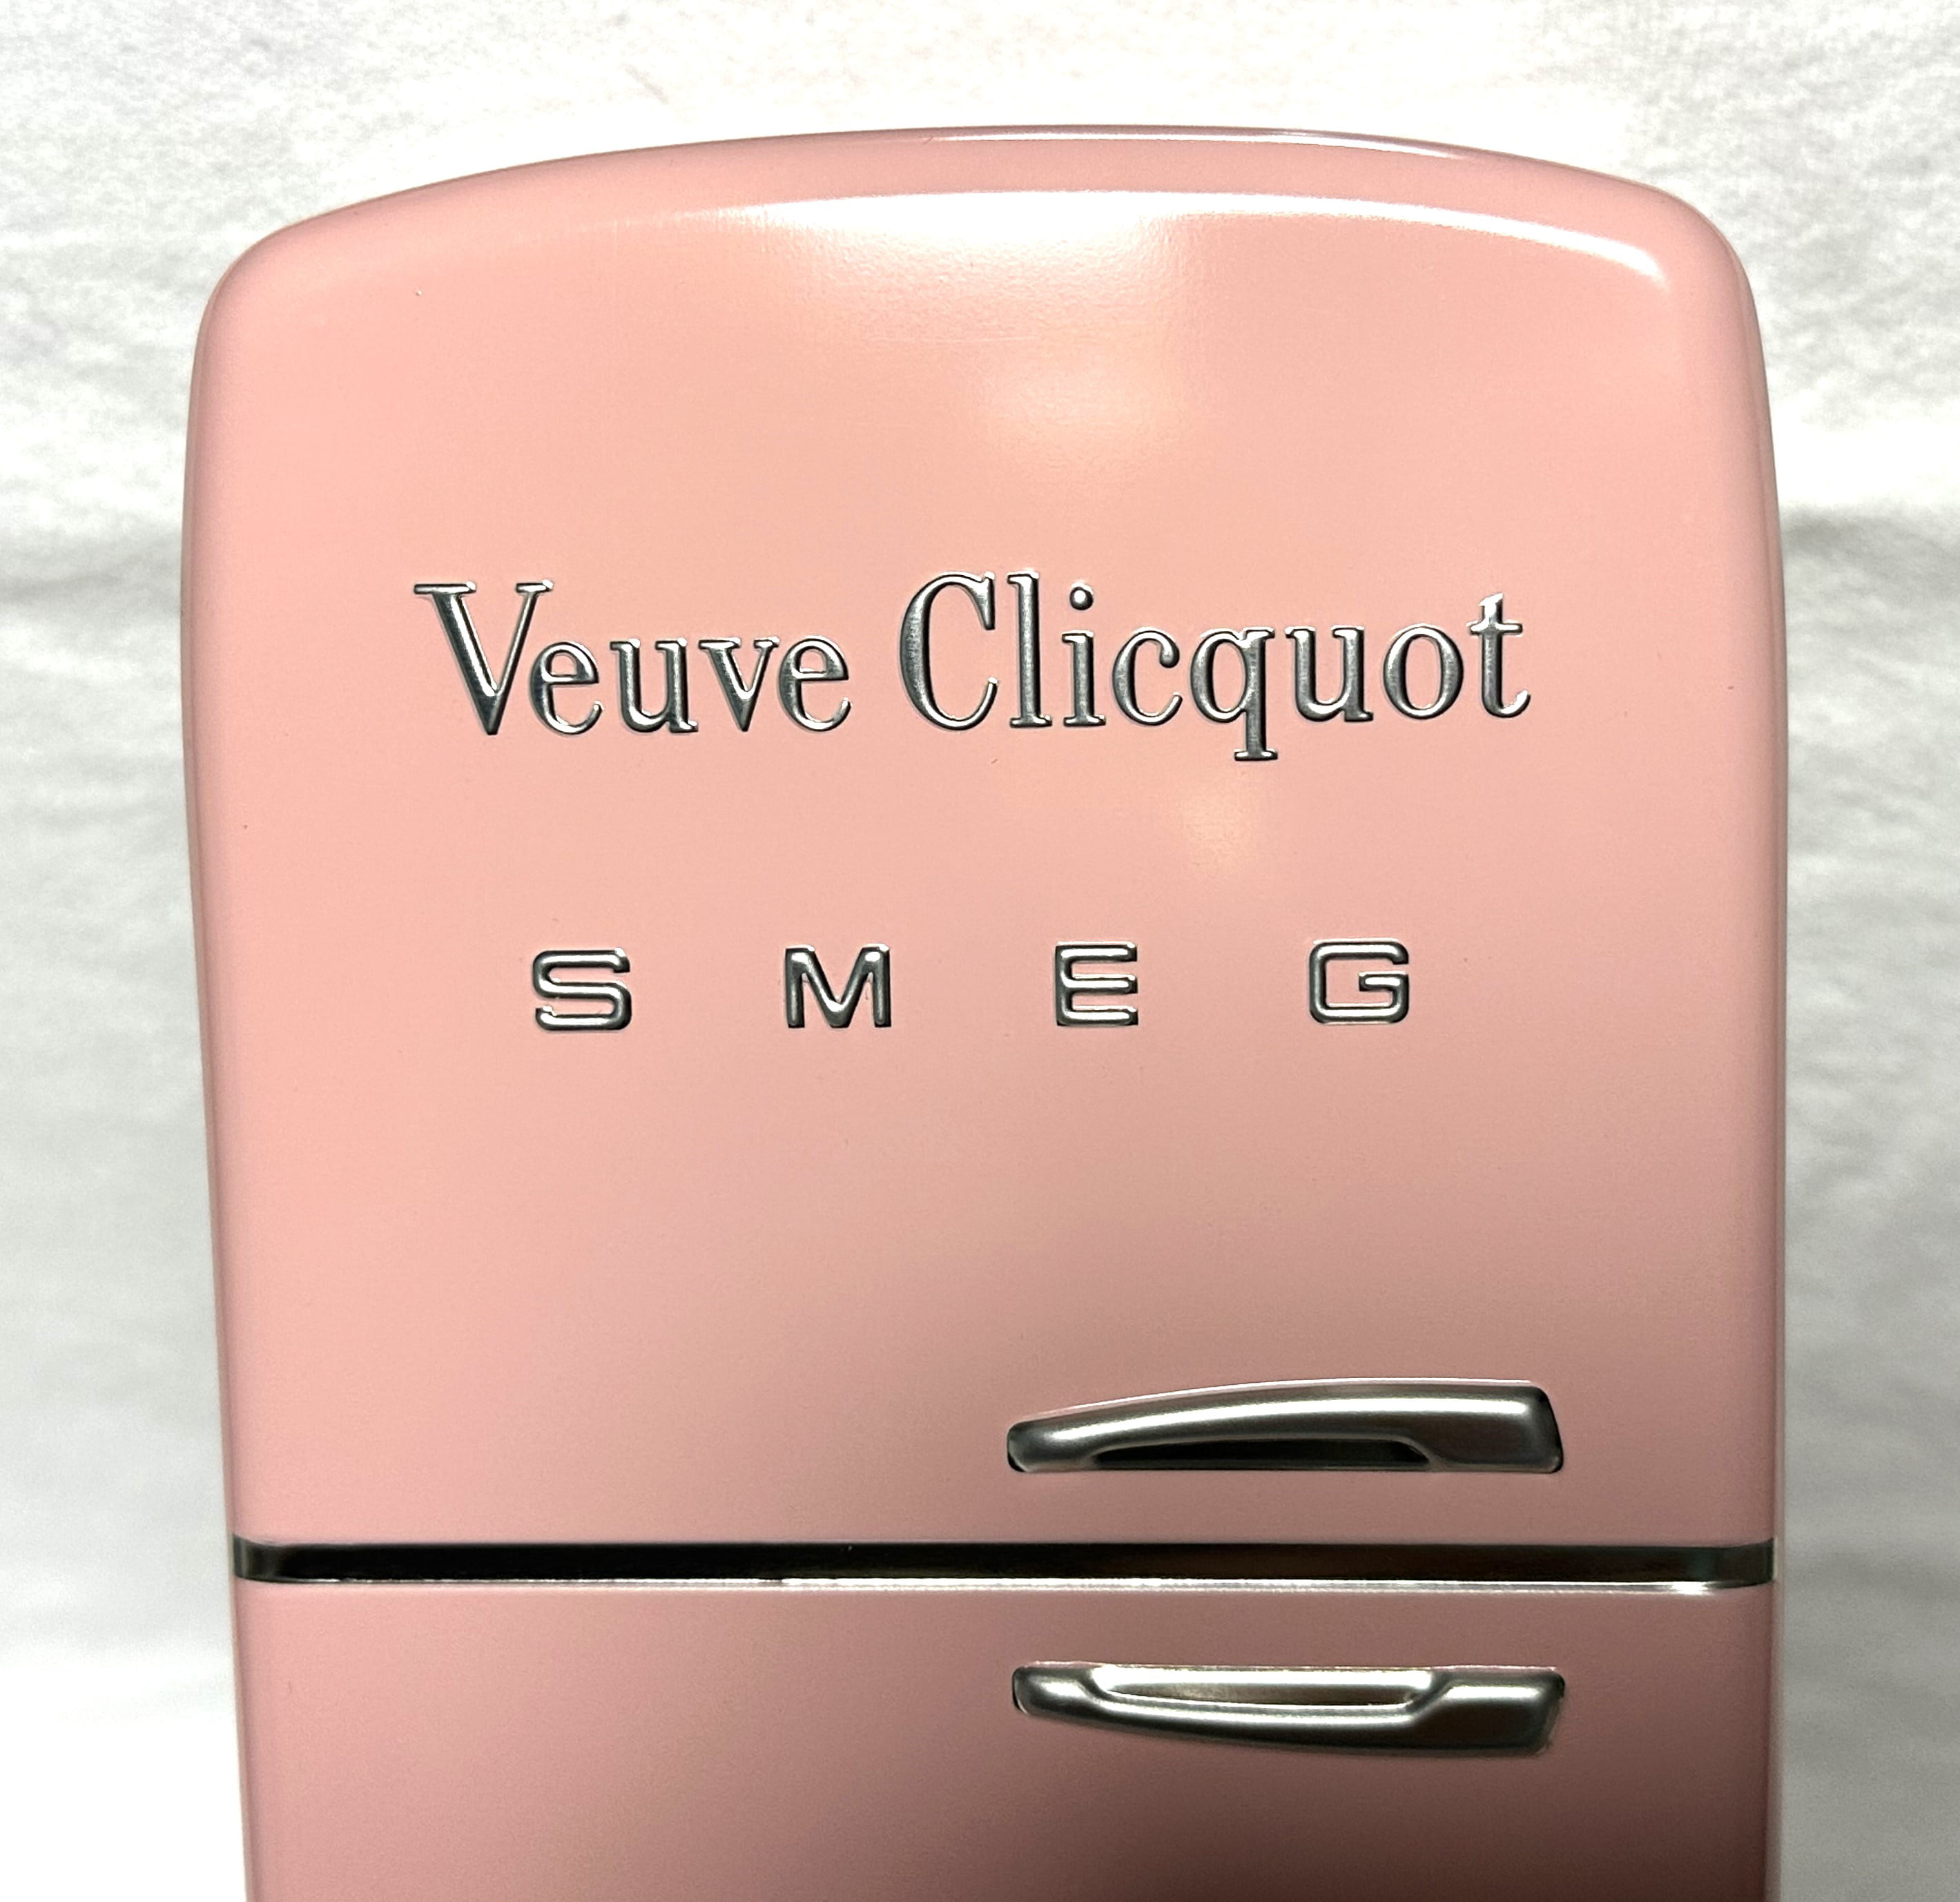 Smeg Has Collaborated With Veuve Clicquot on a Limited-Edition Fridge –  Robb Report